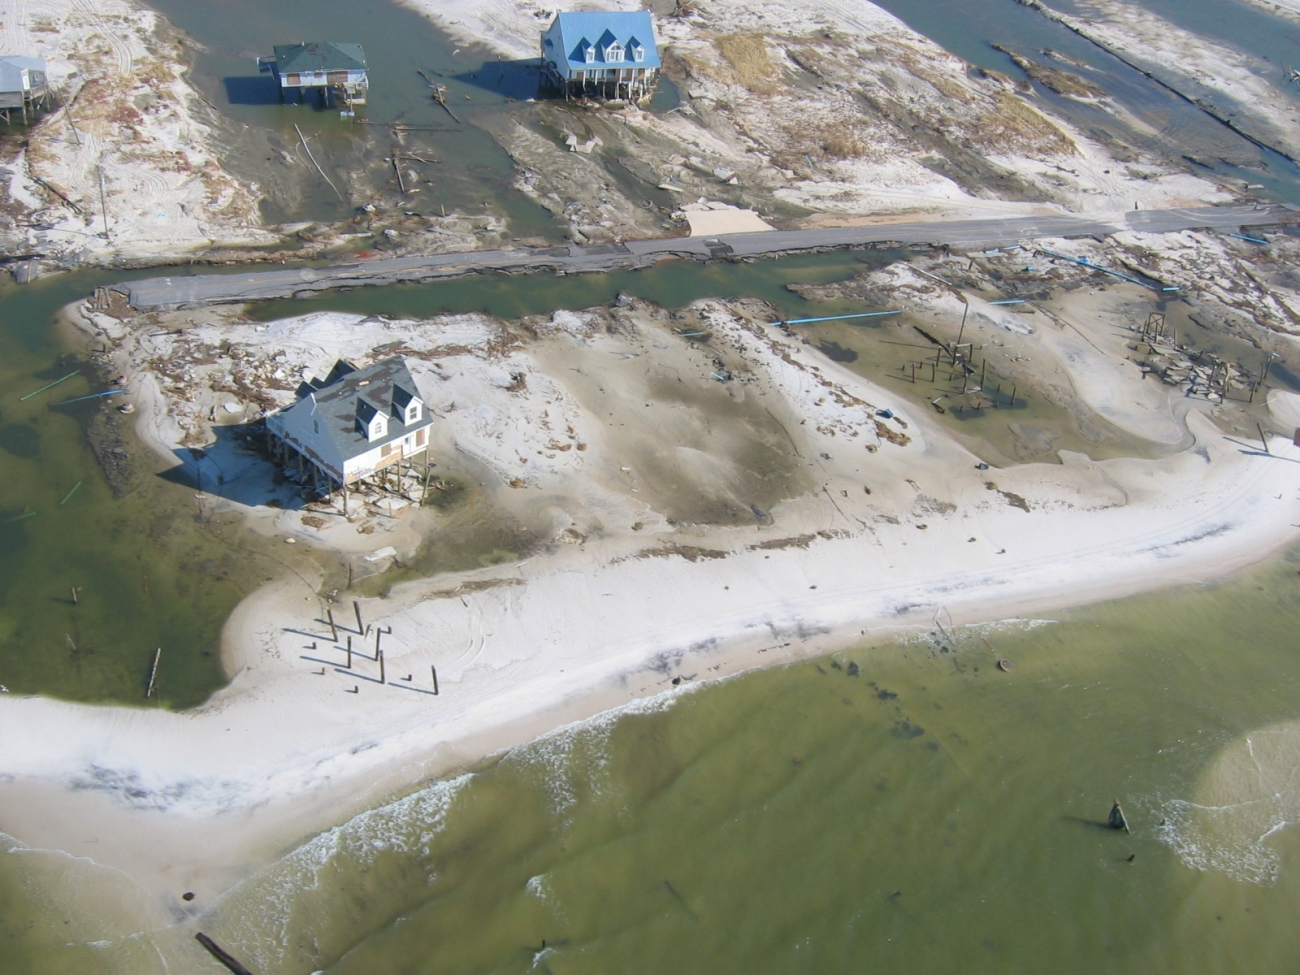 Damage to beach front homes on Dauphin Island, AL